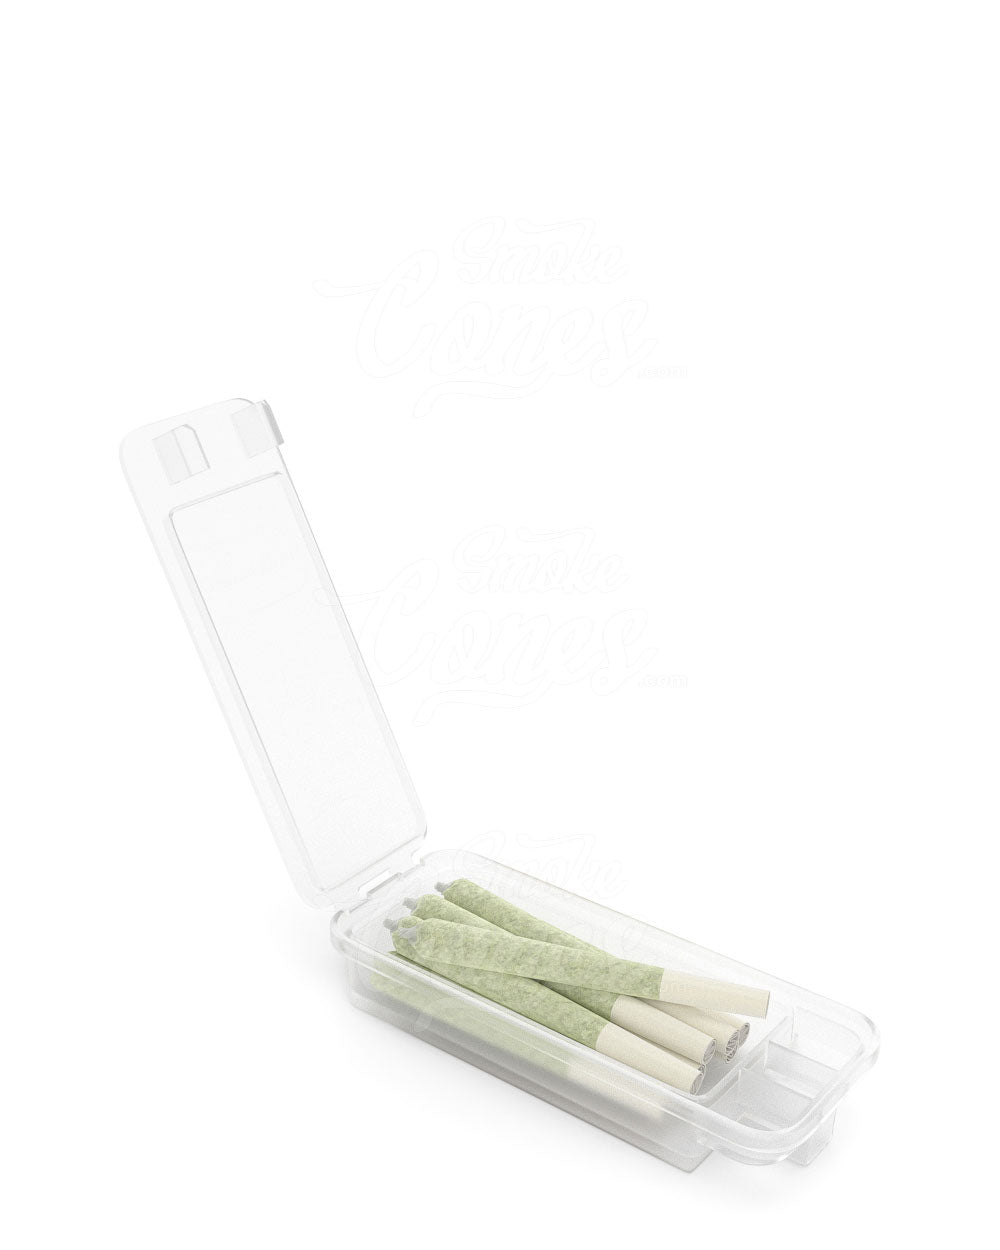 70mm Pollen Gear Clear SnapTech Child Resistant Edible & Pre-Roll Small Joint Case 240/Box - 2